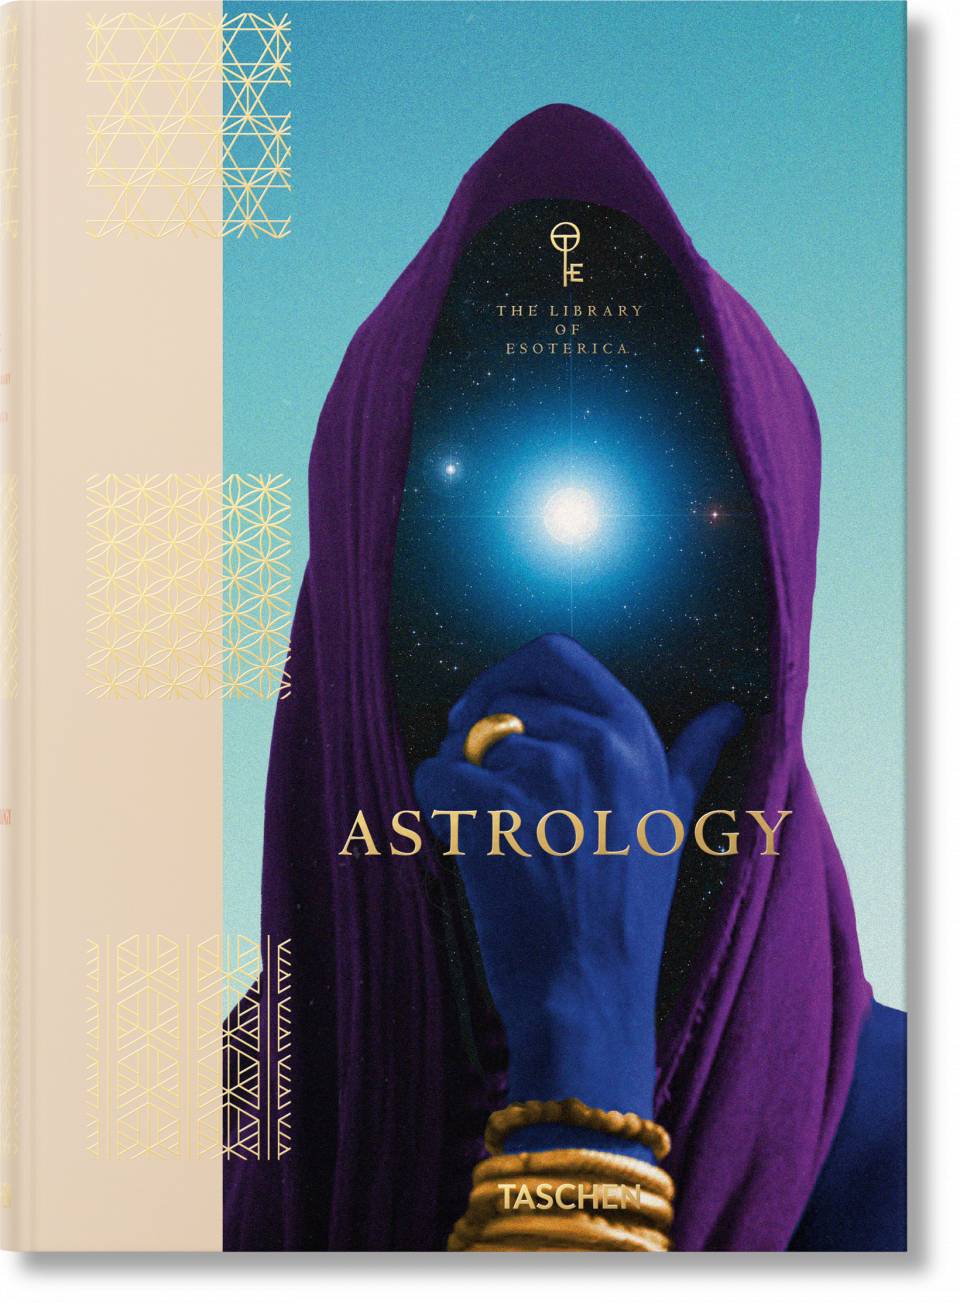 TASCHEN BOOKS - Astrology. The Library of Esoterica